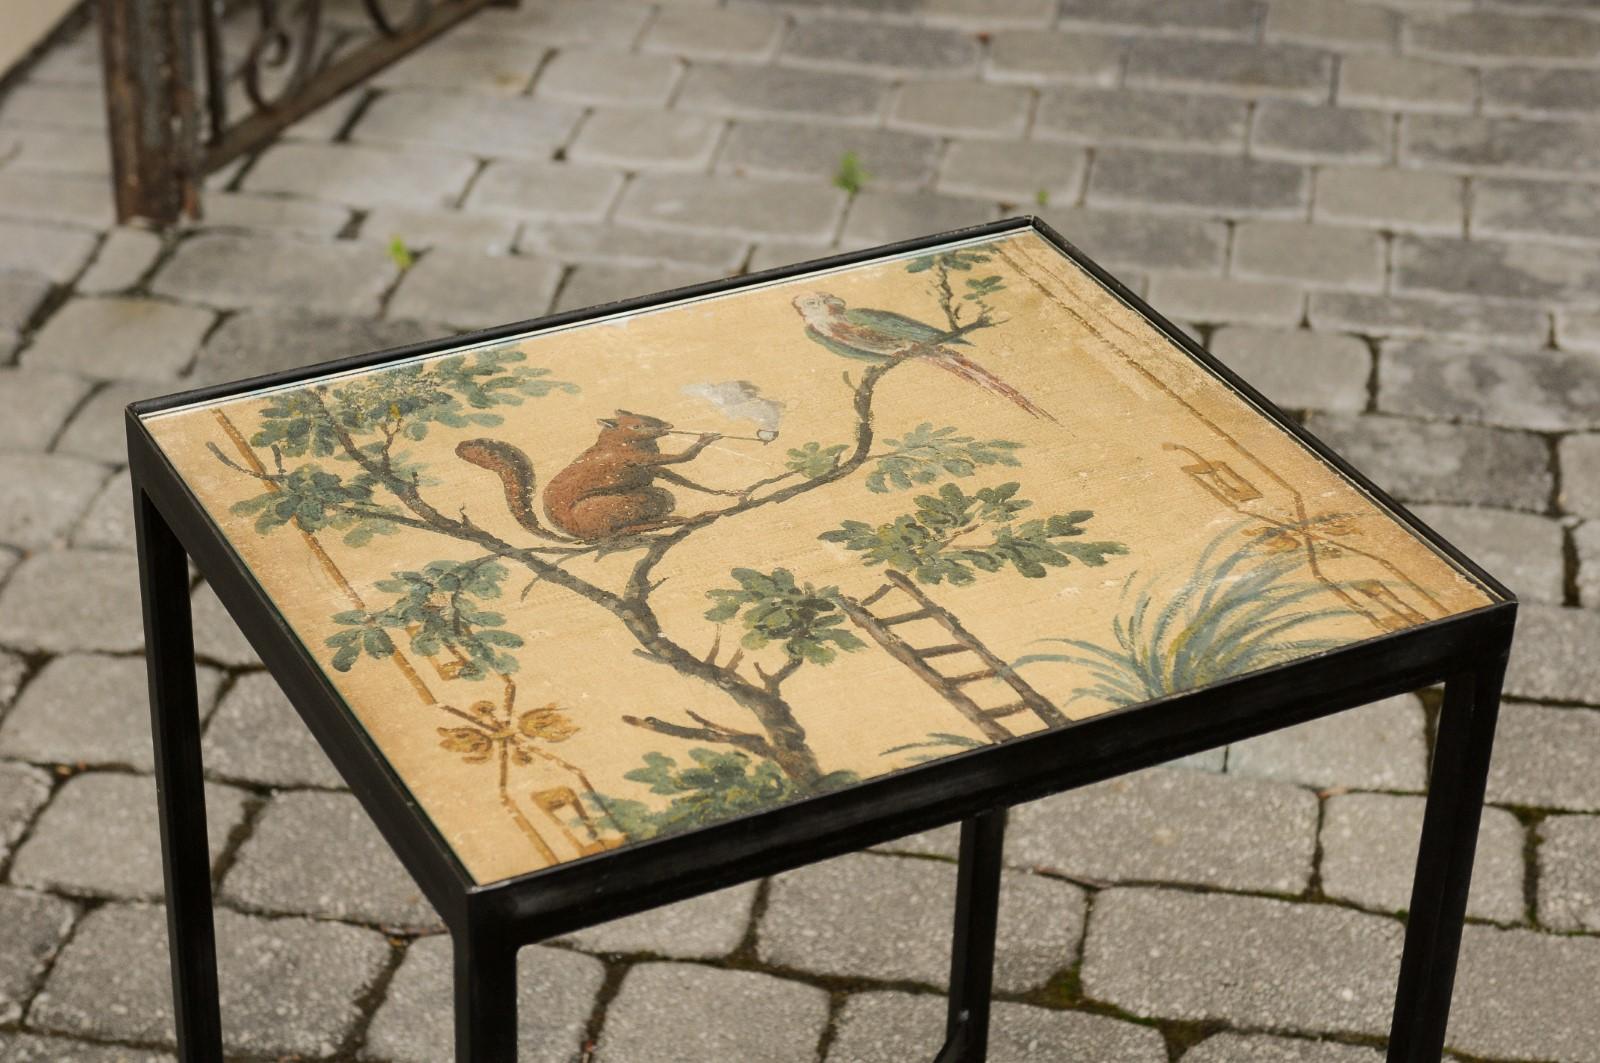 A contemporary chinoiserie style side table made from an antique 1870s screen depicting a squirrel and a bird, mounted on a custom iron stand. We currently have four tables available of two slightly different dimensions available. This stylish